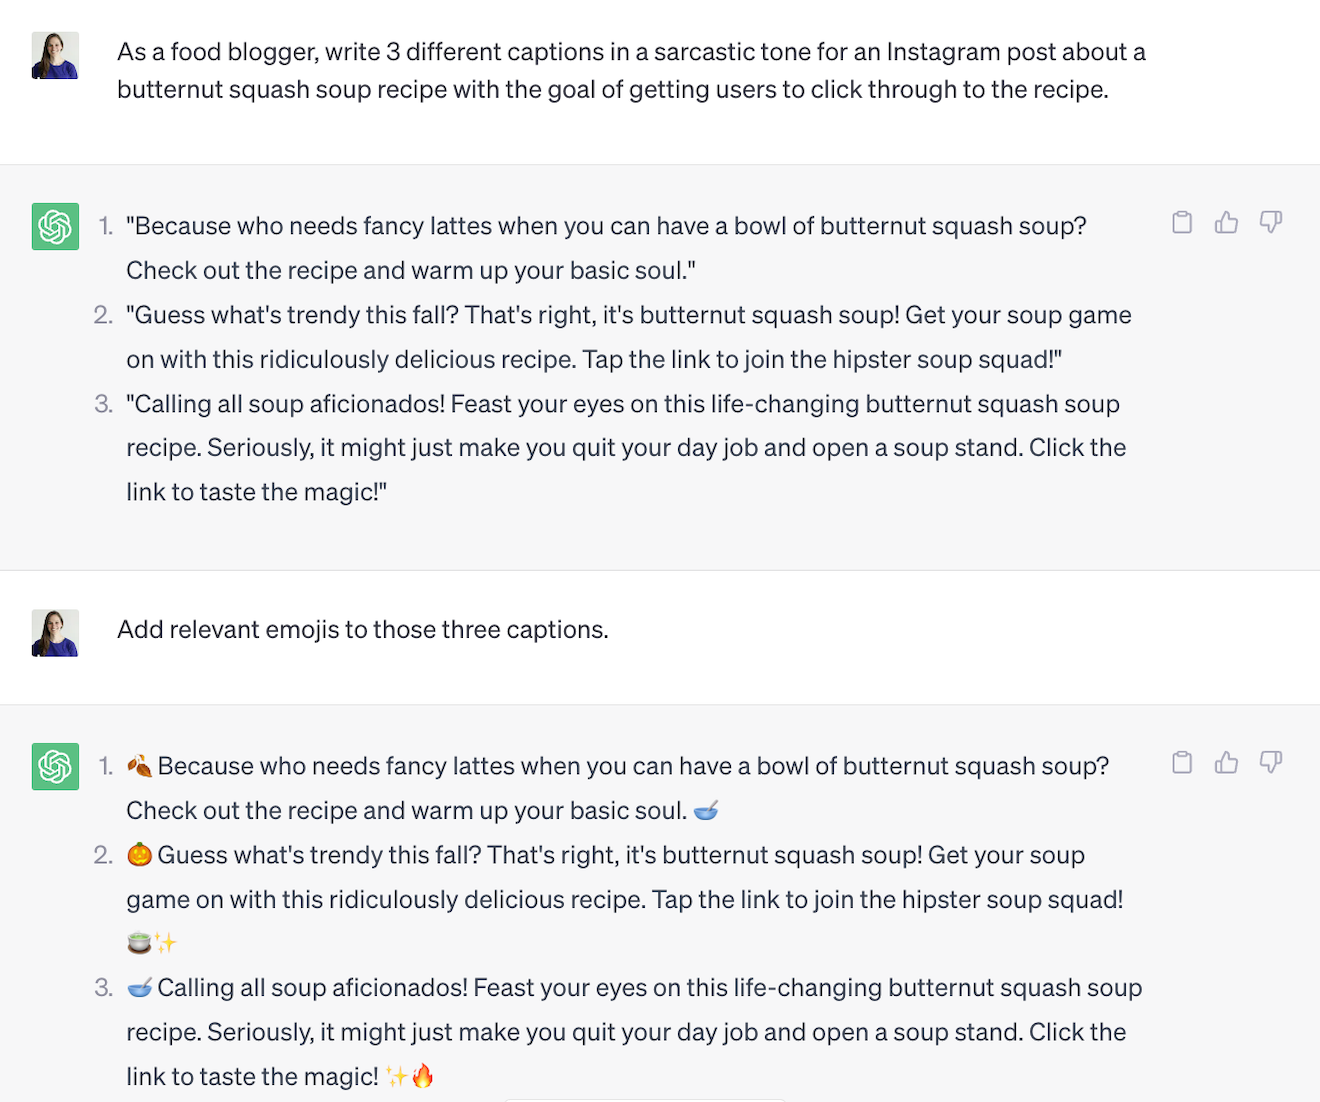 A screenshot of a ChatGPT conversation with the prompt: "As a food blogger, write 3 different captions in a sarcastic tone for an Instagram post about a butternut squash soup recipe with the goal of getting users to click through to the recipe" followed by the prompt: "Add relevant emojis to those three captions."